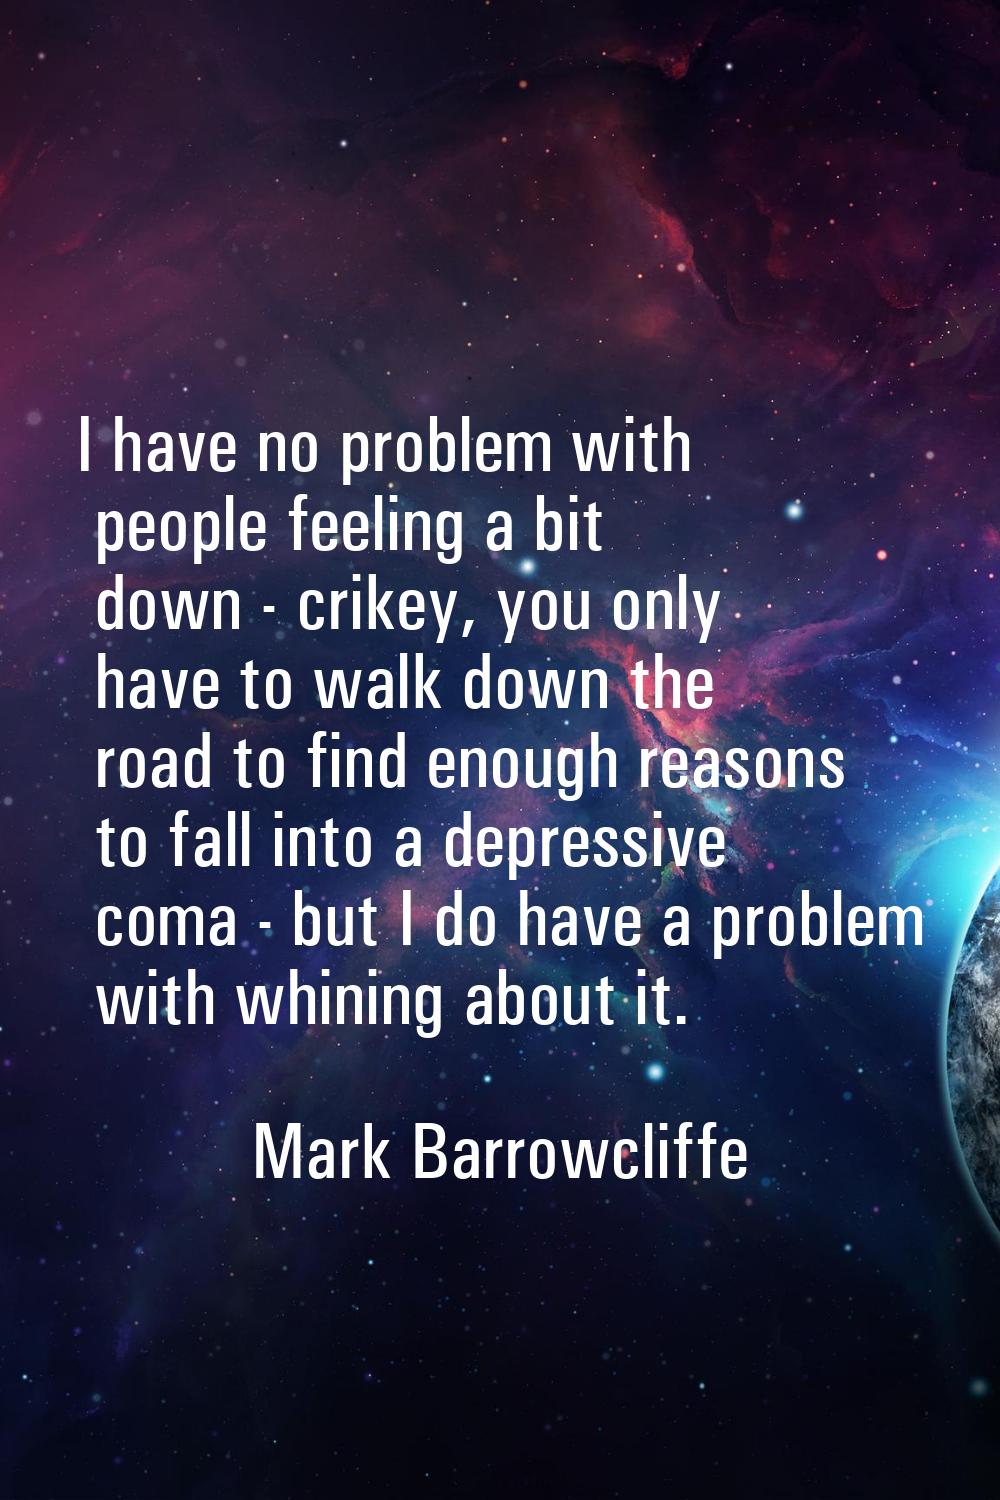 I have no problem with people feeling a bit down - crikey, you only have to walk down the road to f